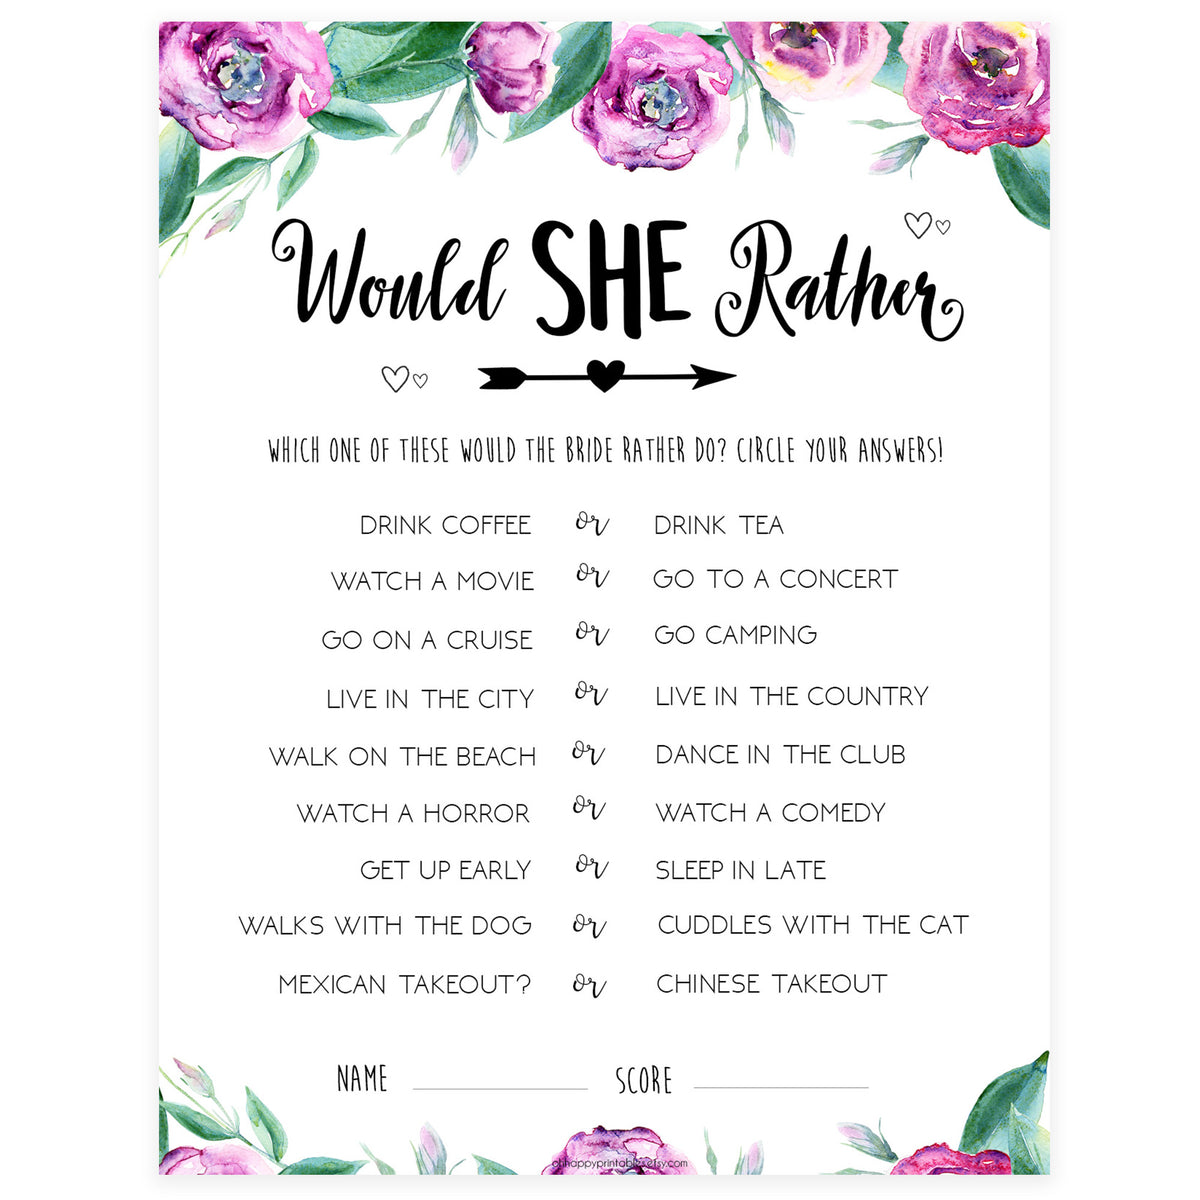 would-she-rather-bridal-shower-game-free-printable-would-she-rather-bridal-shower-game-bridal